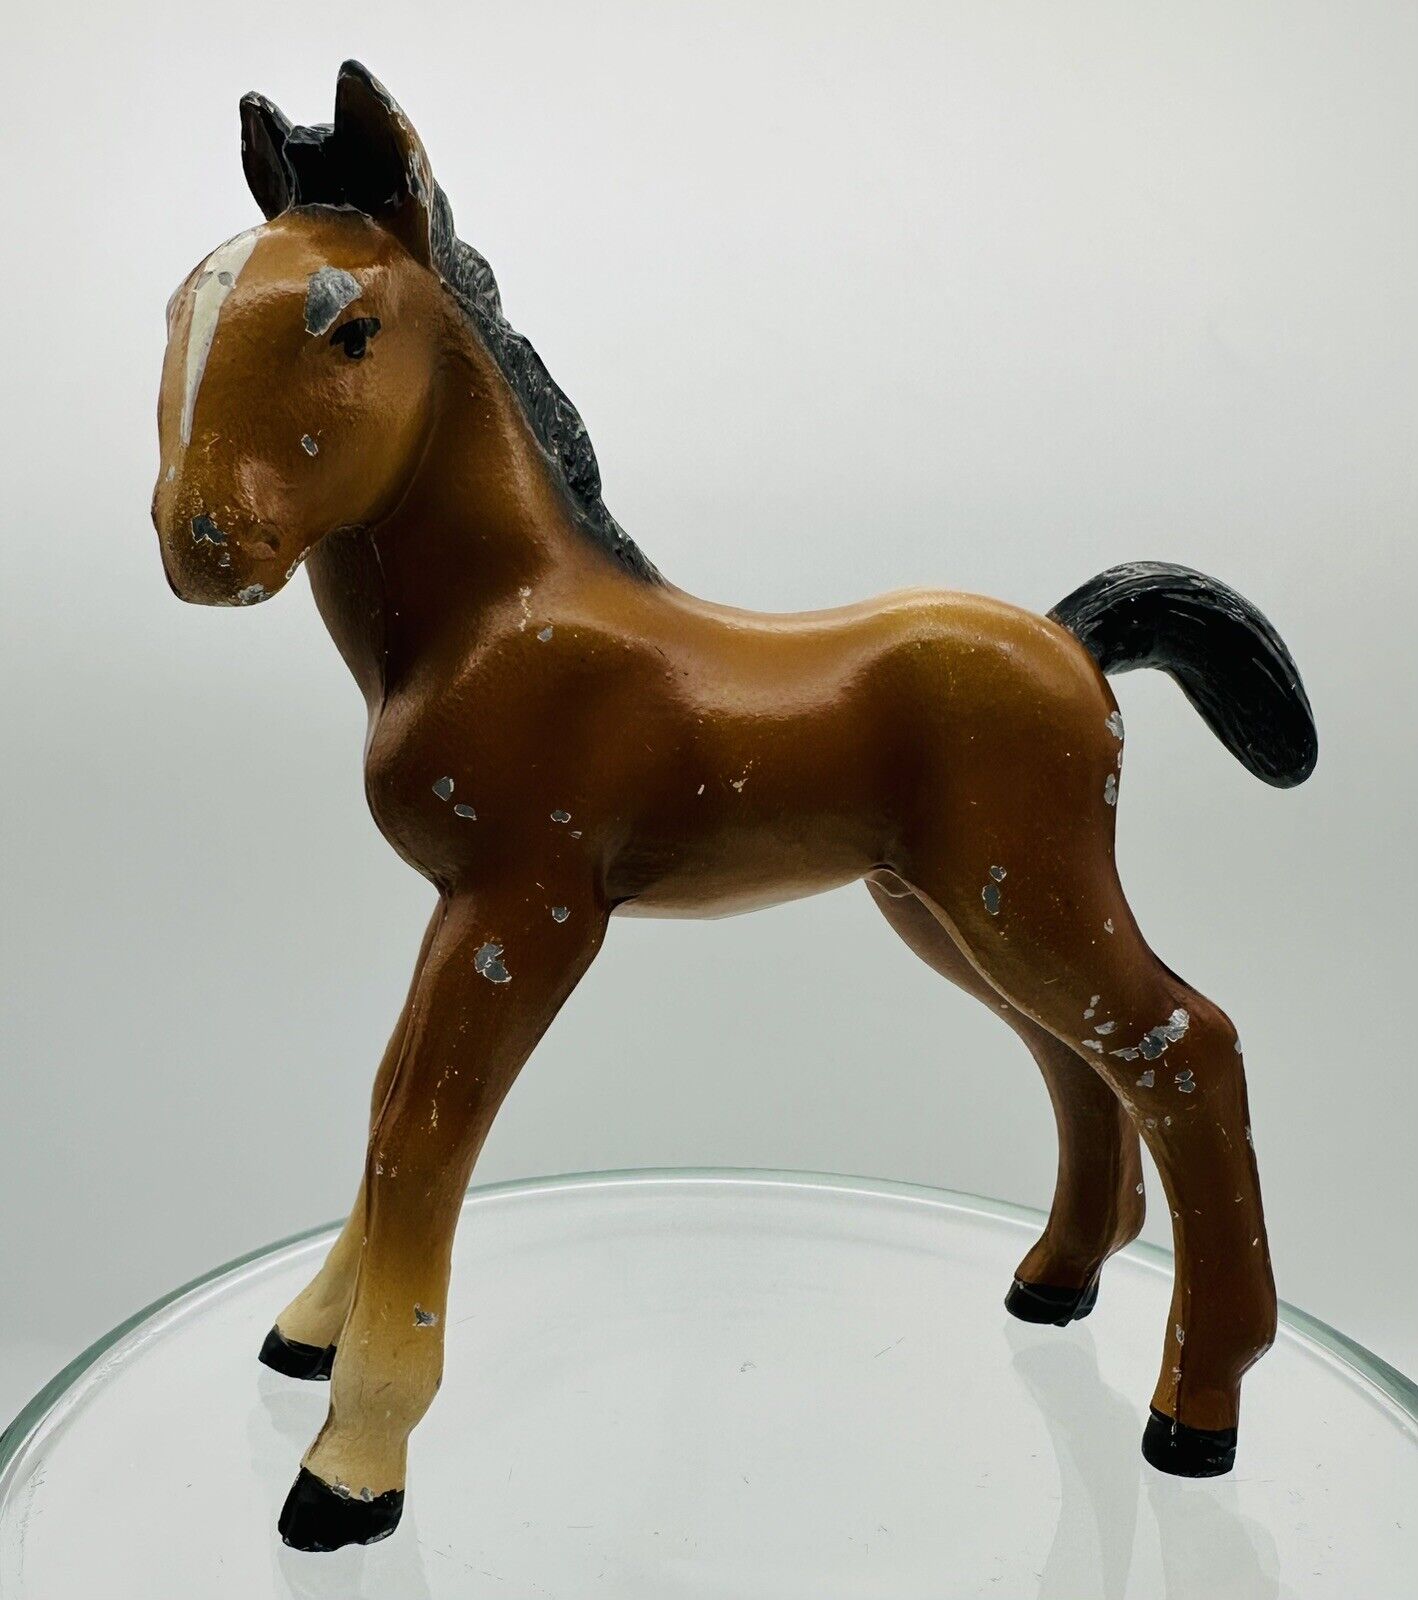 Old Painted Metal Baby Horse Figurine Colt Foal Brown w/ Black Mane Pony Filly